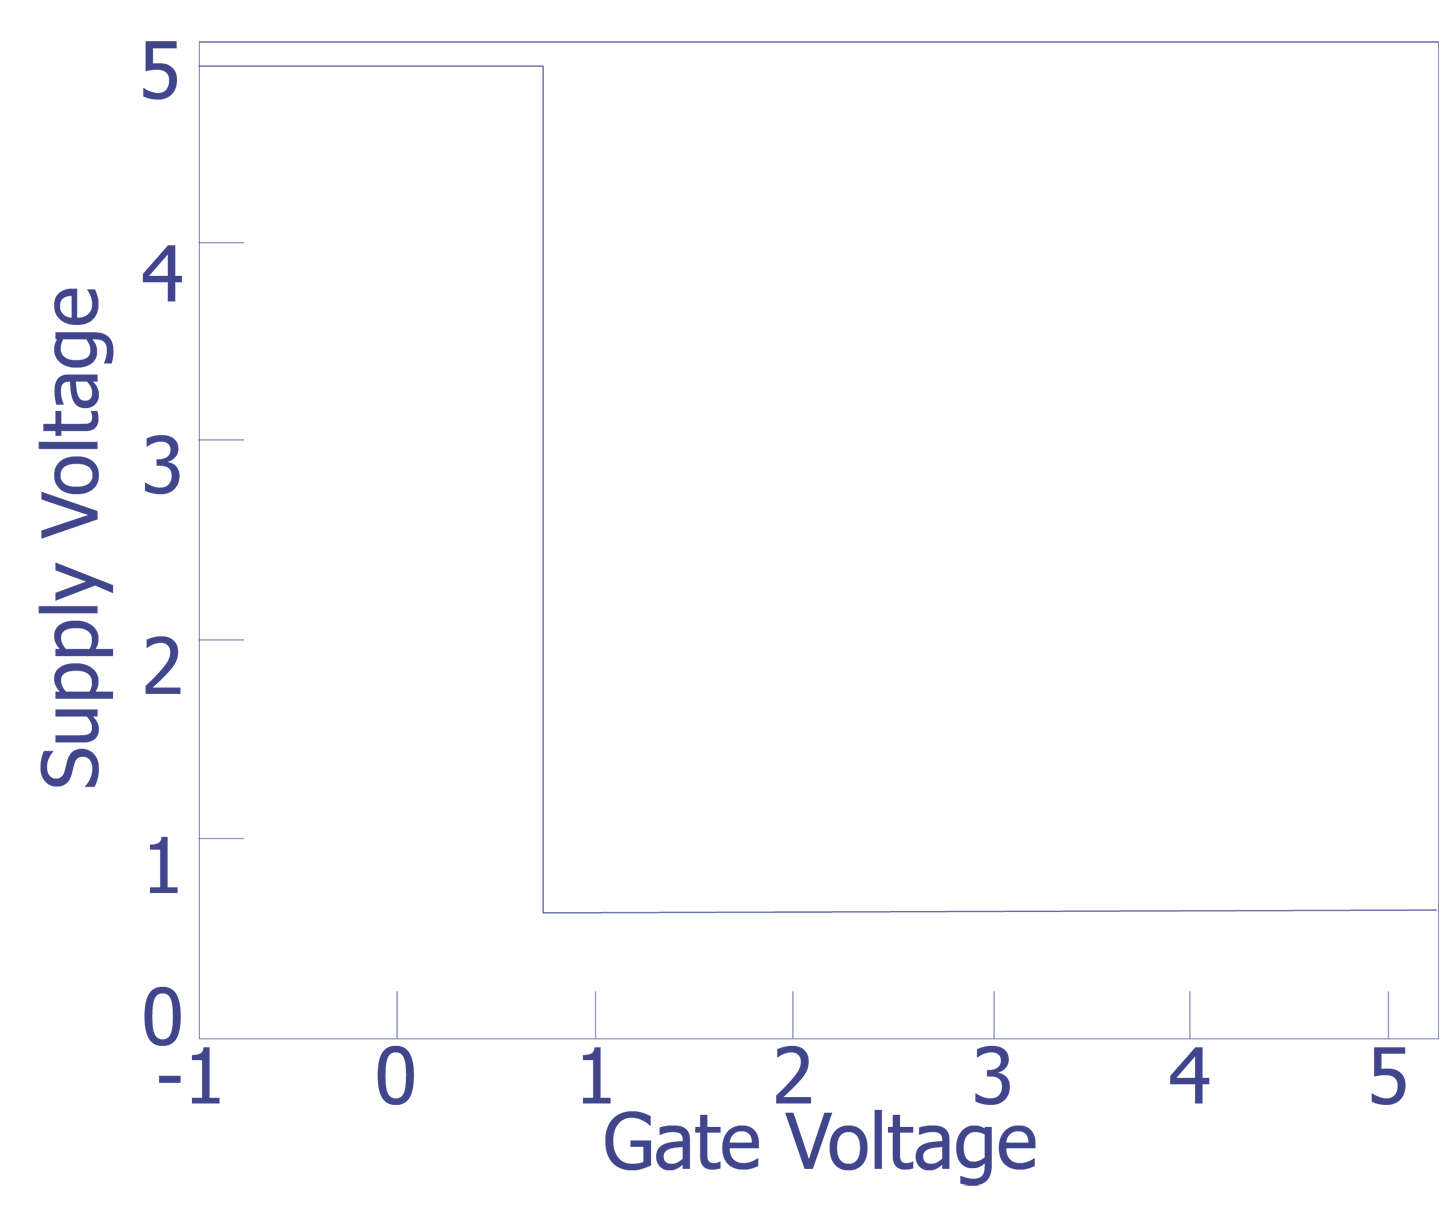 Supply voltage of the inverter as a function of gate voltage on the n-channel input transistor. The p-channel transistor gate was tied to ground.